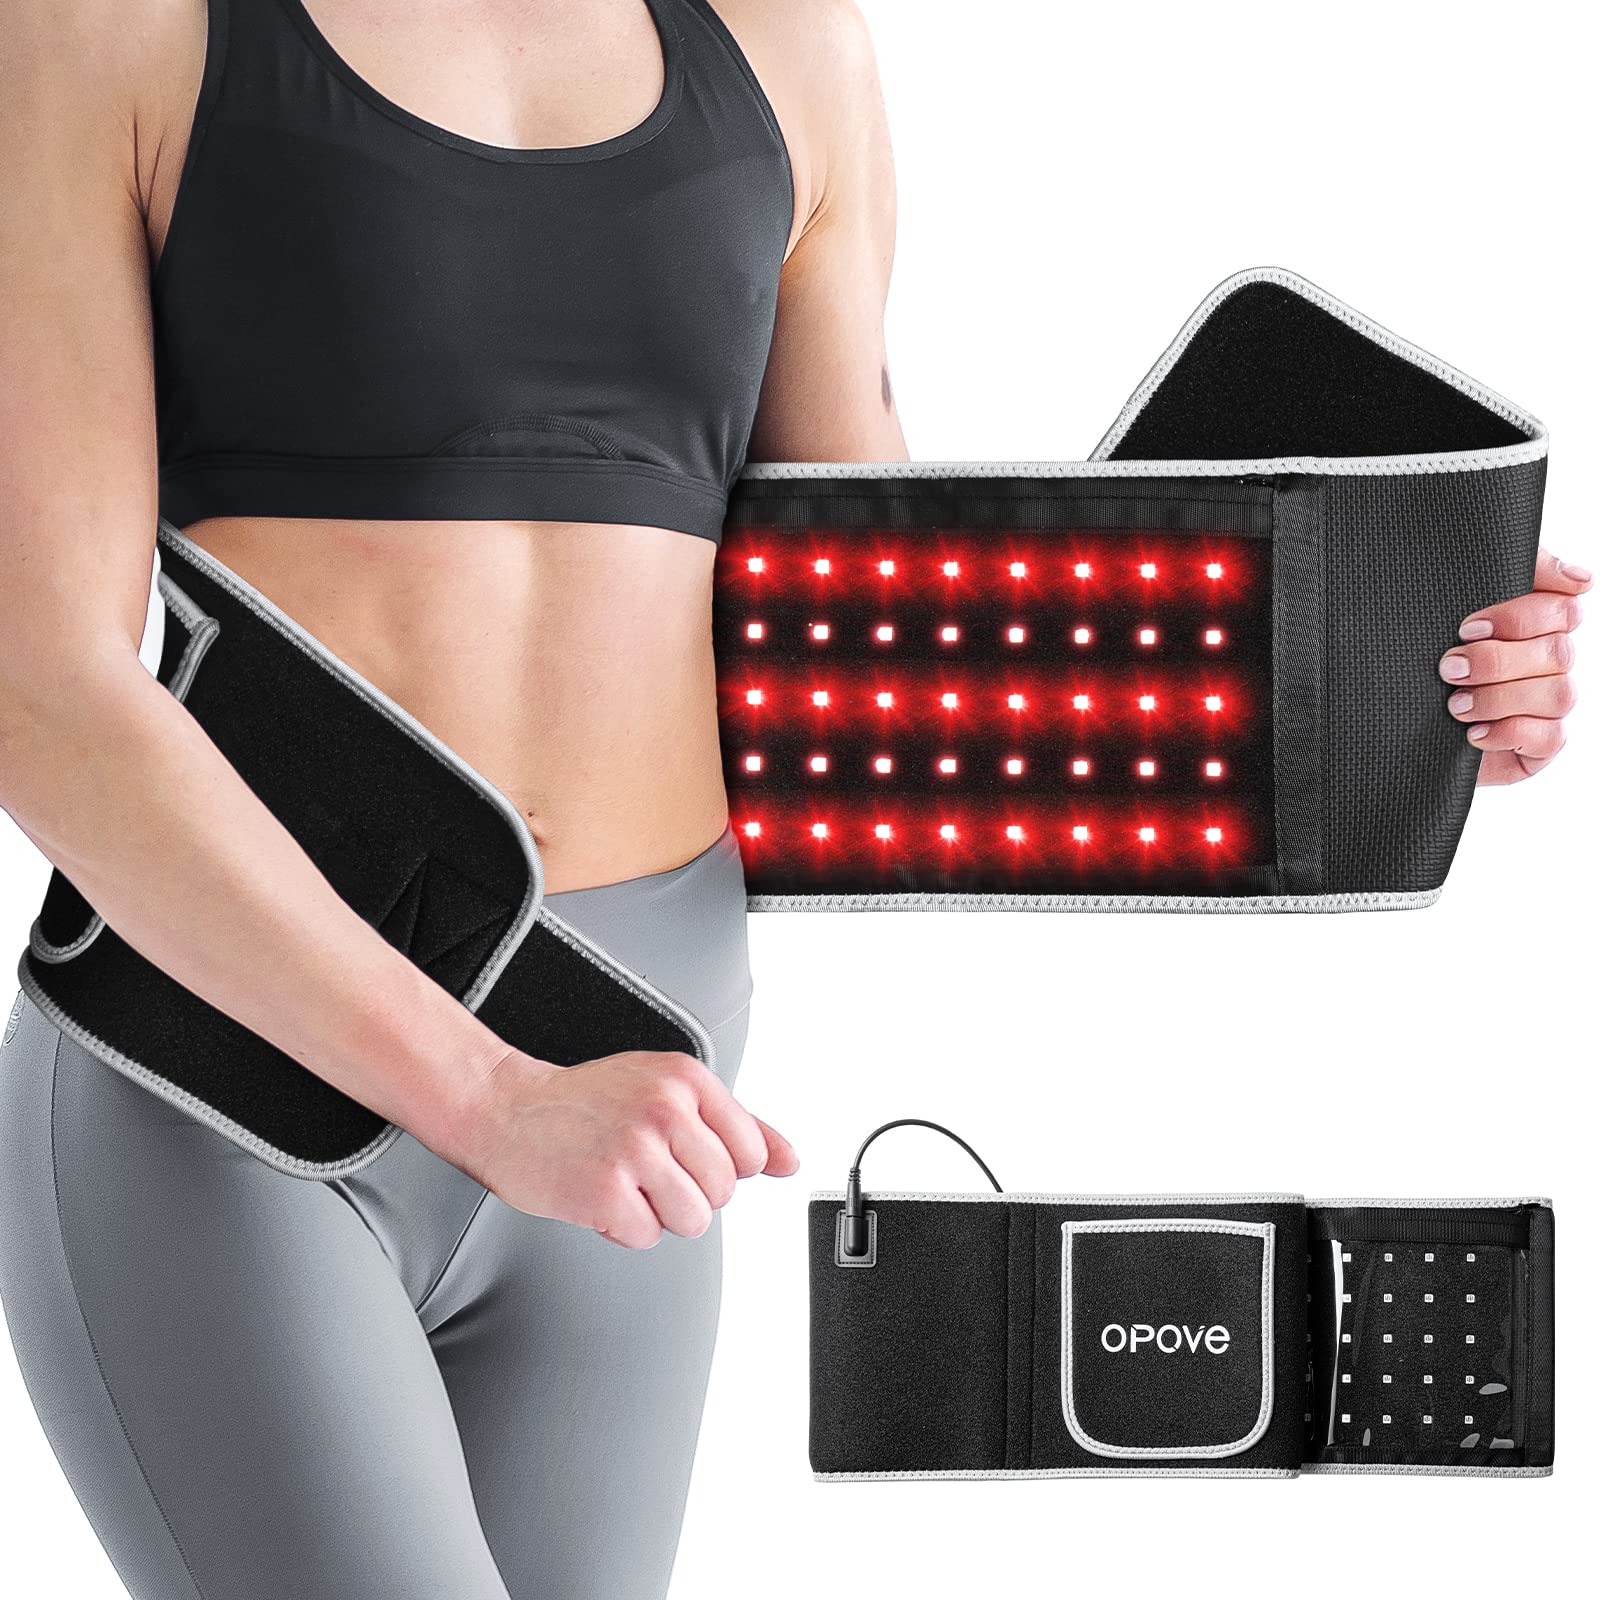 Opove Red Light Therapy Belt Near-Infrared Light Therapy for Tissue Repair, Resolve Inflammation, Relieve Joint & Back Pain, Wearable Flexible Portable Lipo Wrap for Body, 660nm & 850nm Wavelengths,R1